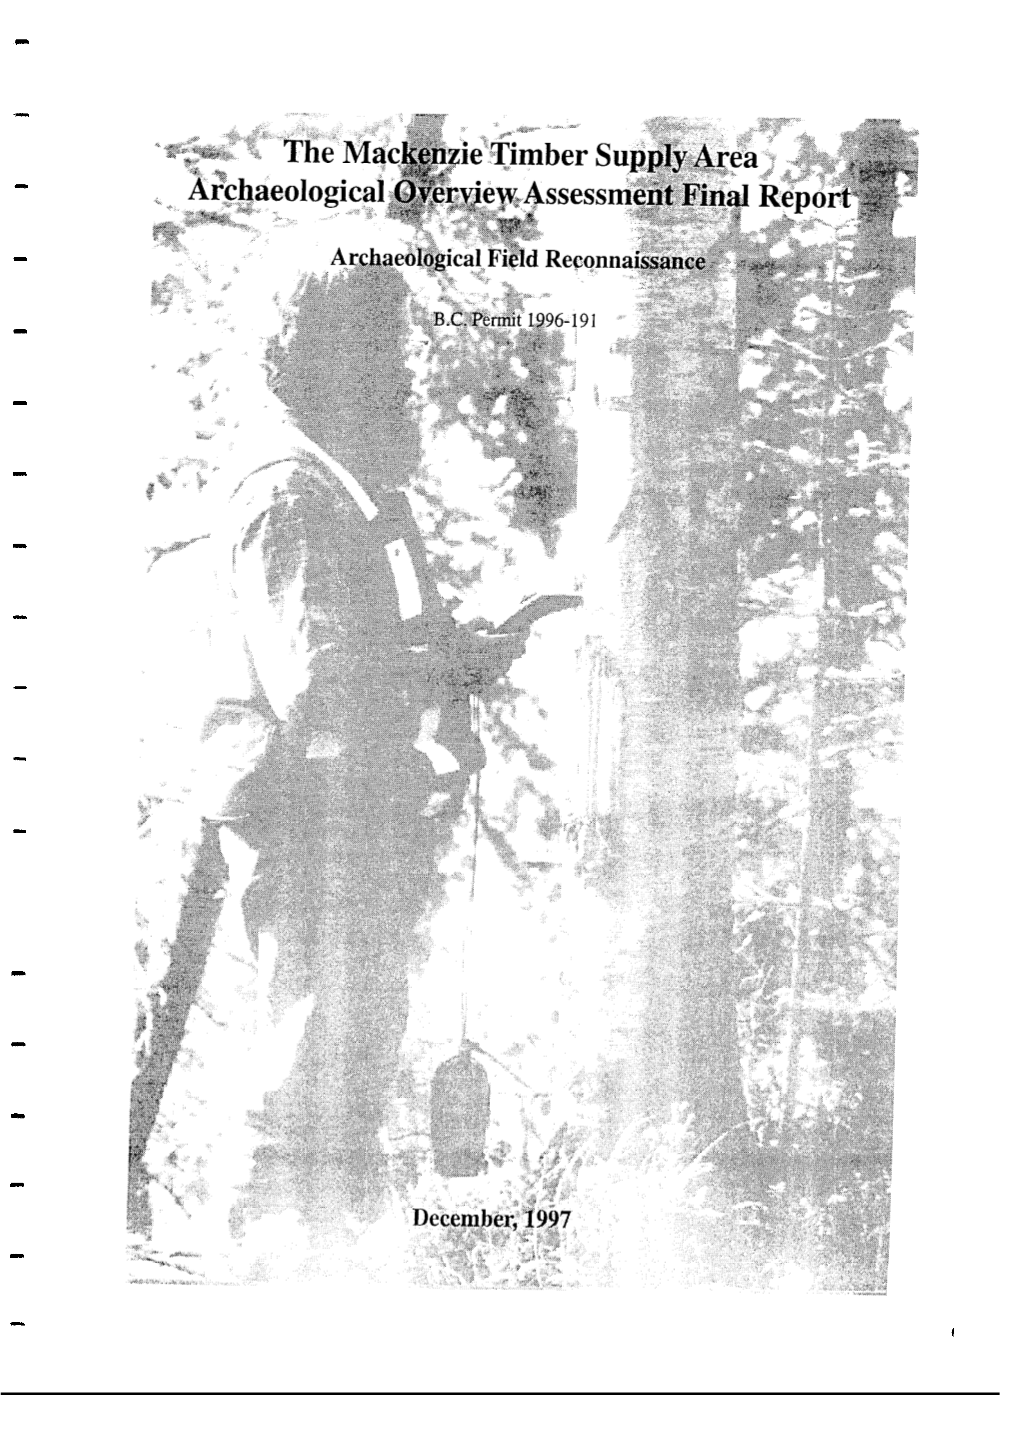 The Mackenzie Timber Supply Area Archaeological Overview Assessment Final Report